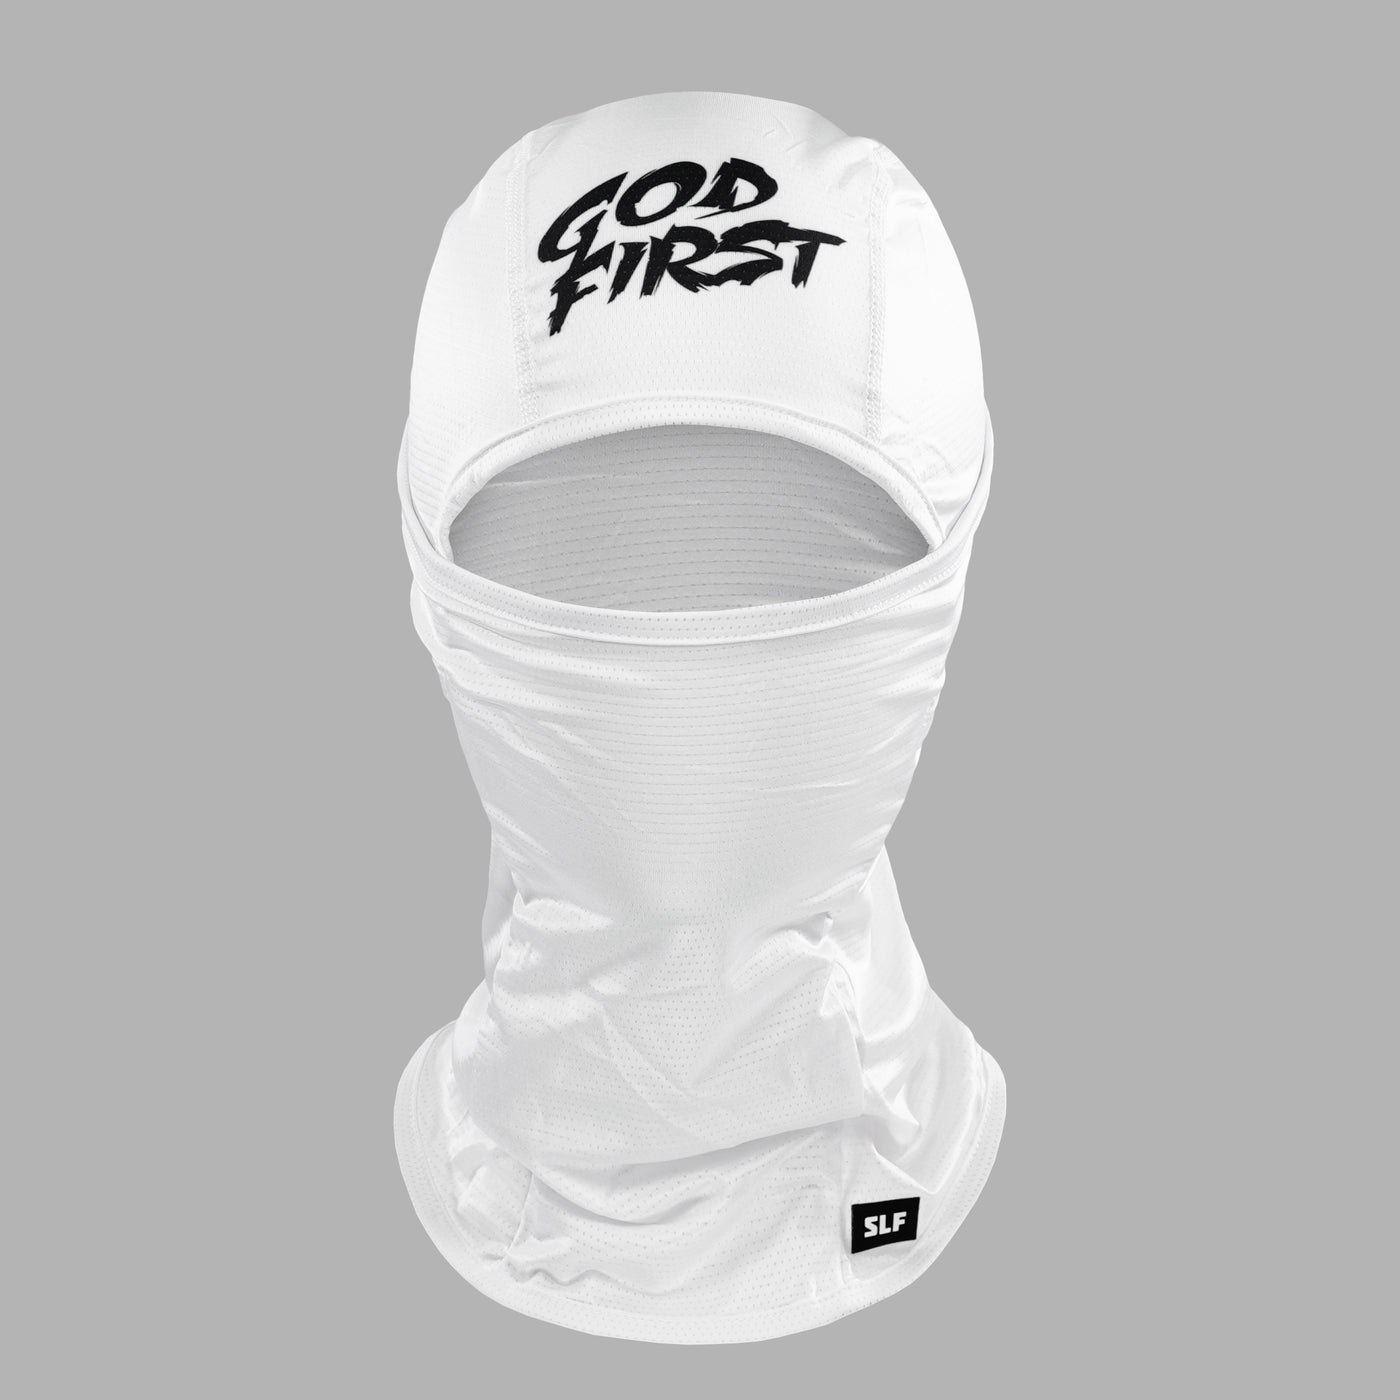 God First White Loose-fitting Shiesty Mask